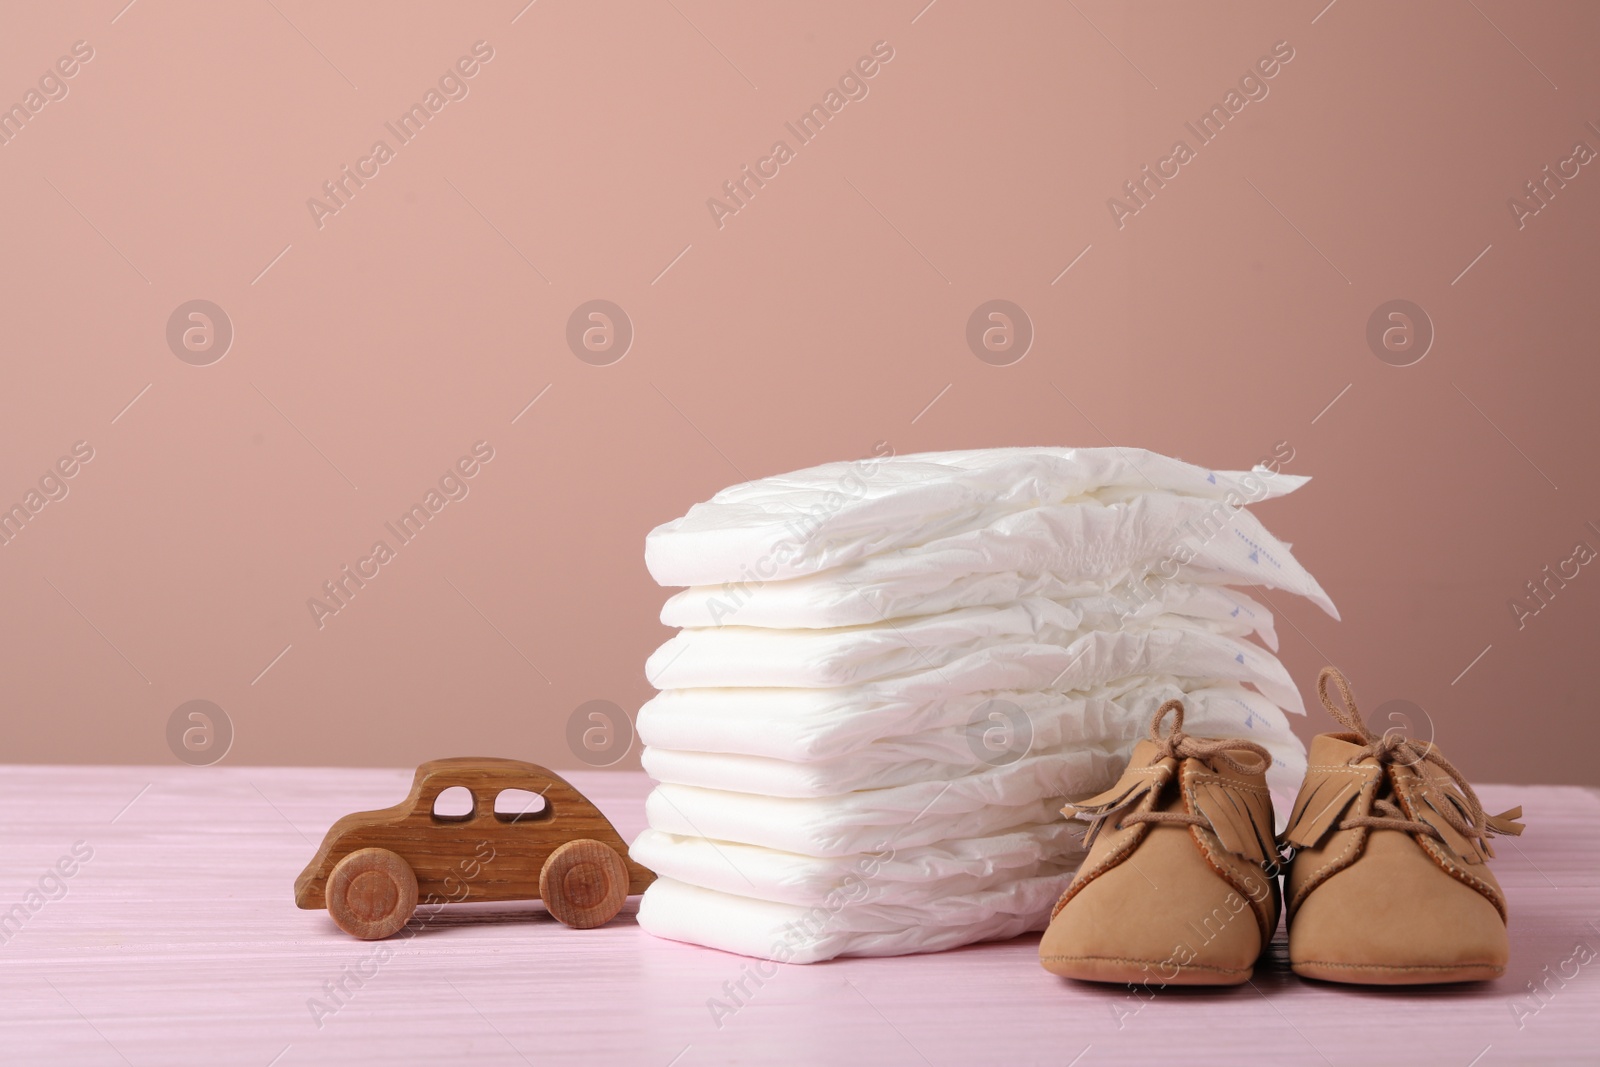 Photo of Baby diapers, toy car and child's shoes on wooden table against pink background